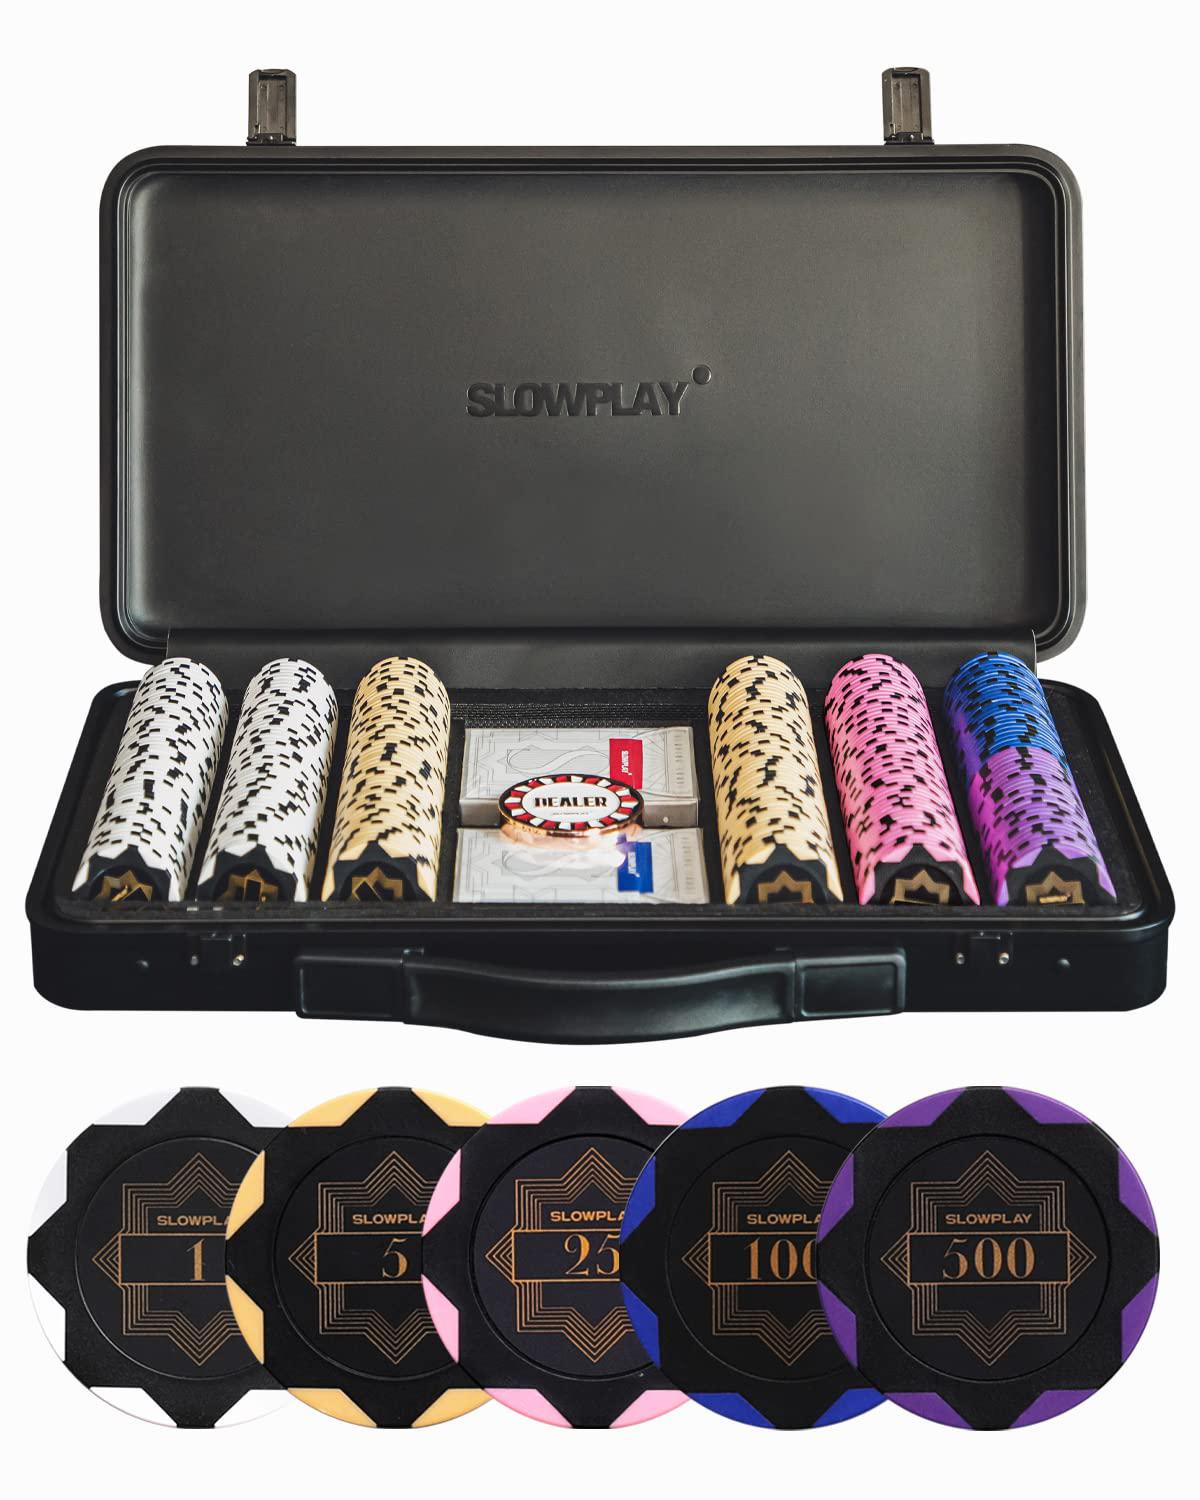 SLOWPLAY Nash 14g Clay Poker Chips Set for Texas Holdem, 300 PCS [with Numbered Values] Features a High-end Chip case with Extra